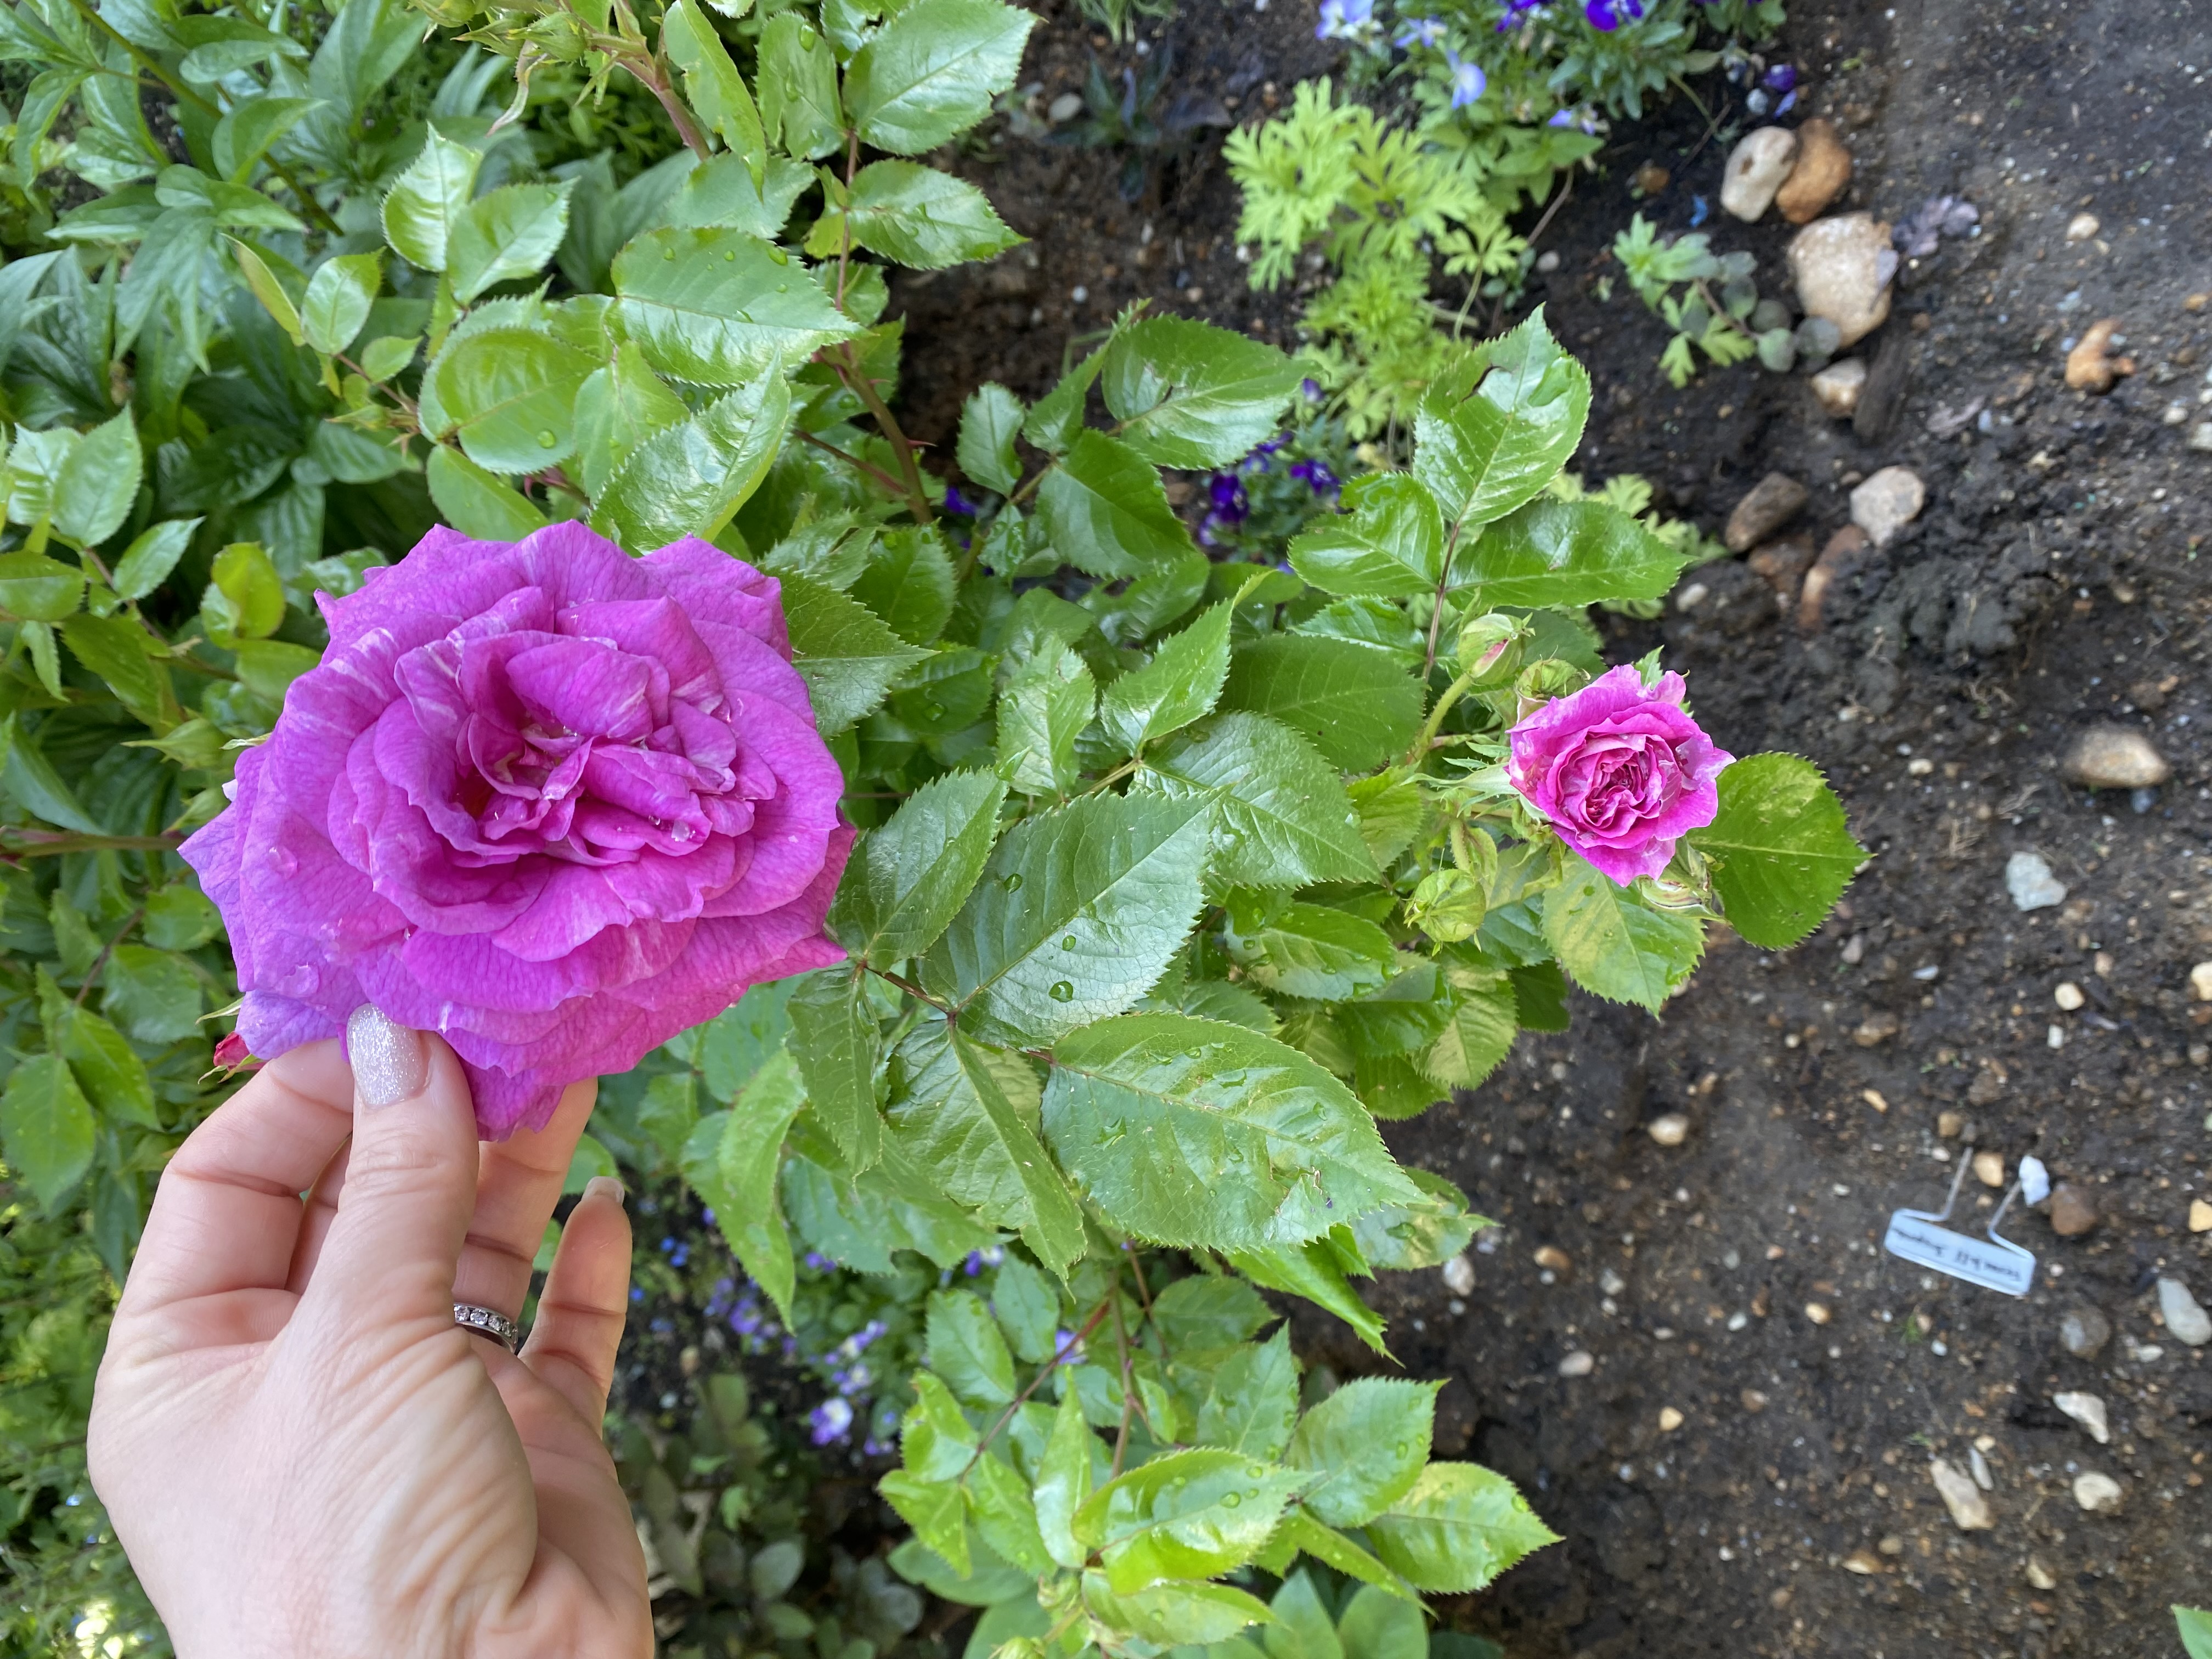 From Andria in North Van, on June 5, 2022: At very long last, I have one bloom to share: it’s Arctic Blue and I’m loving the colour.